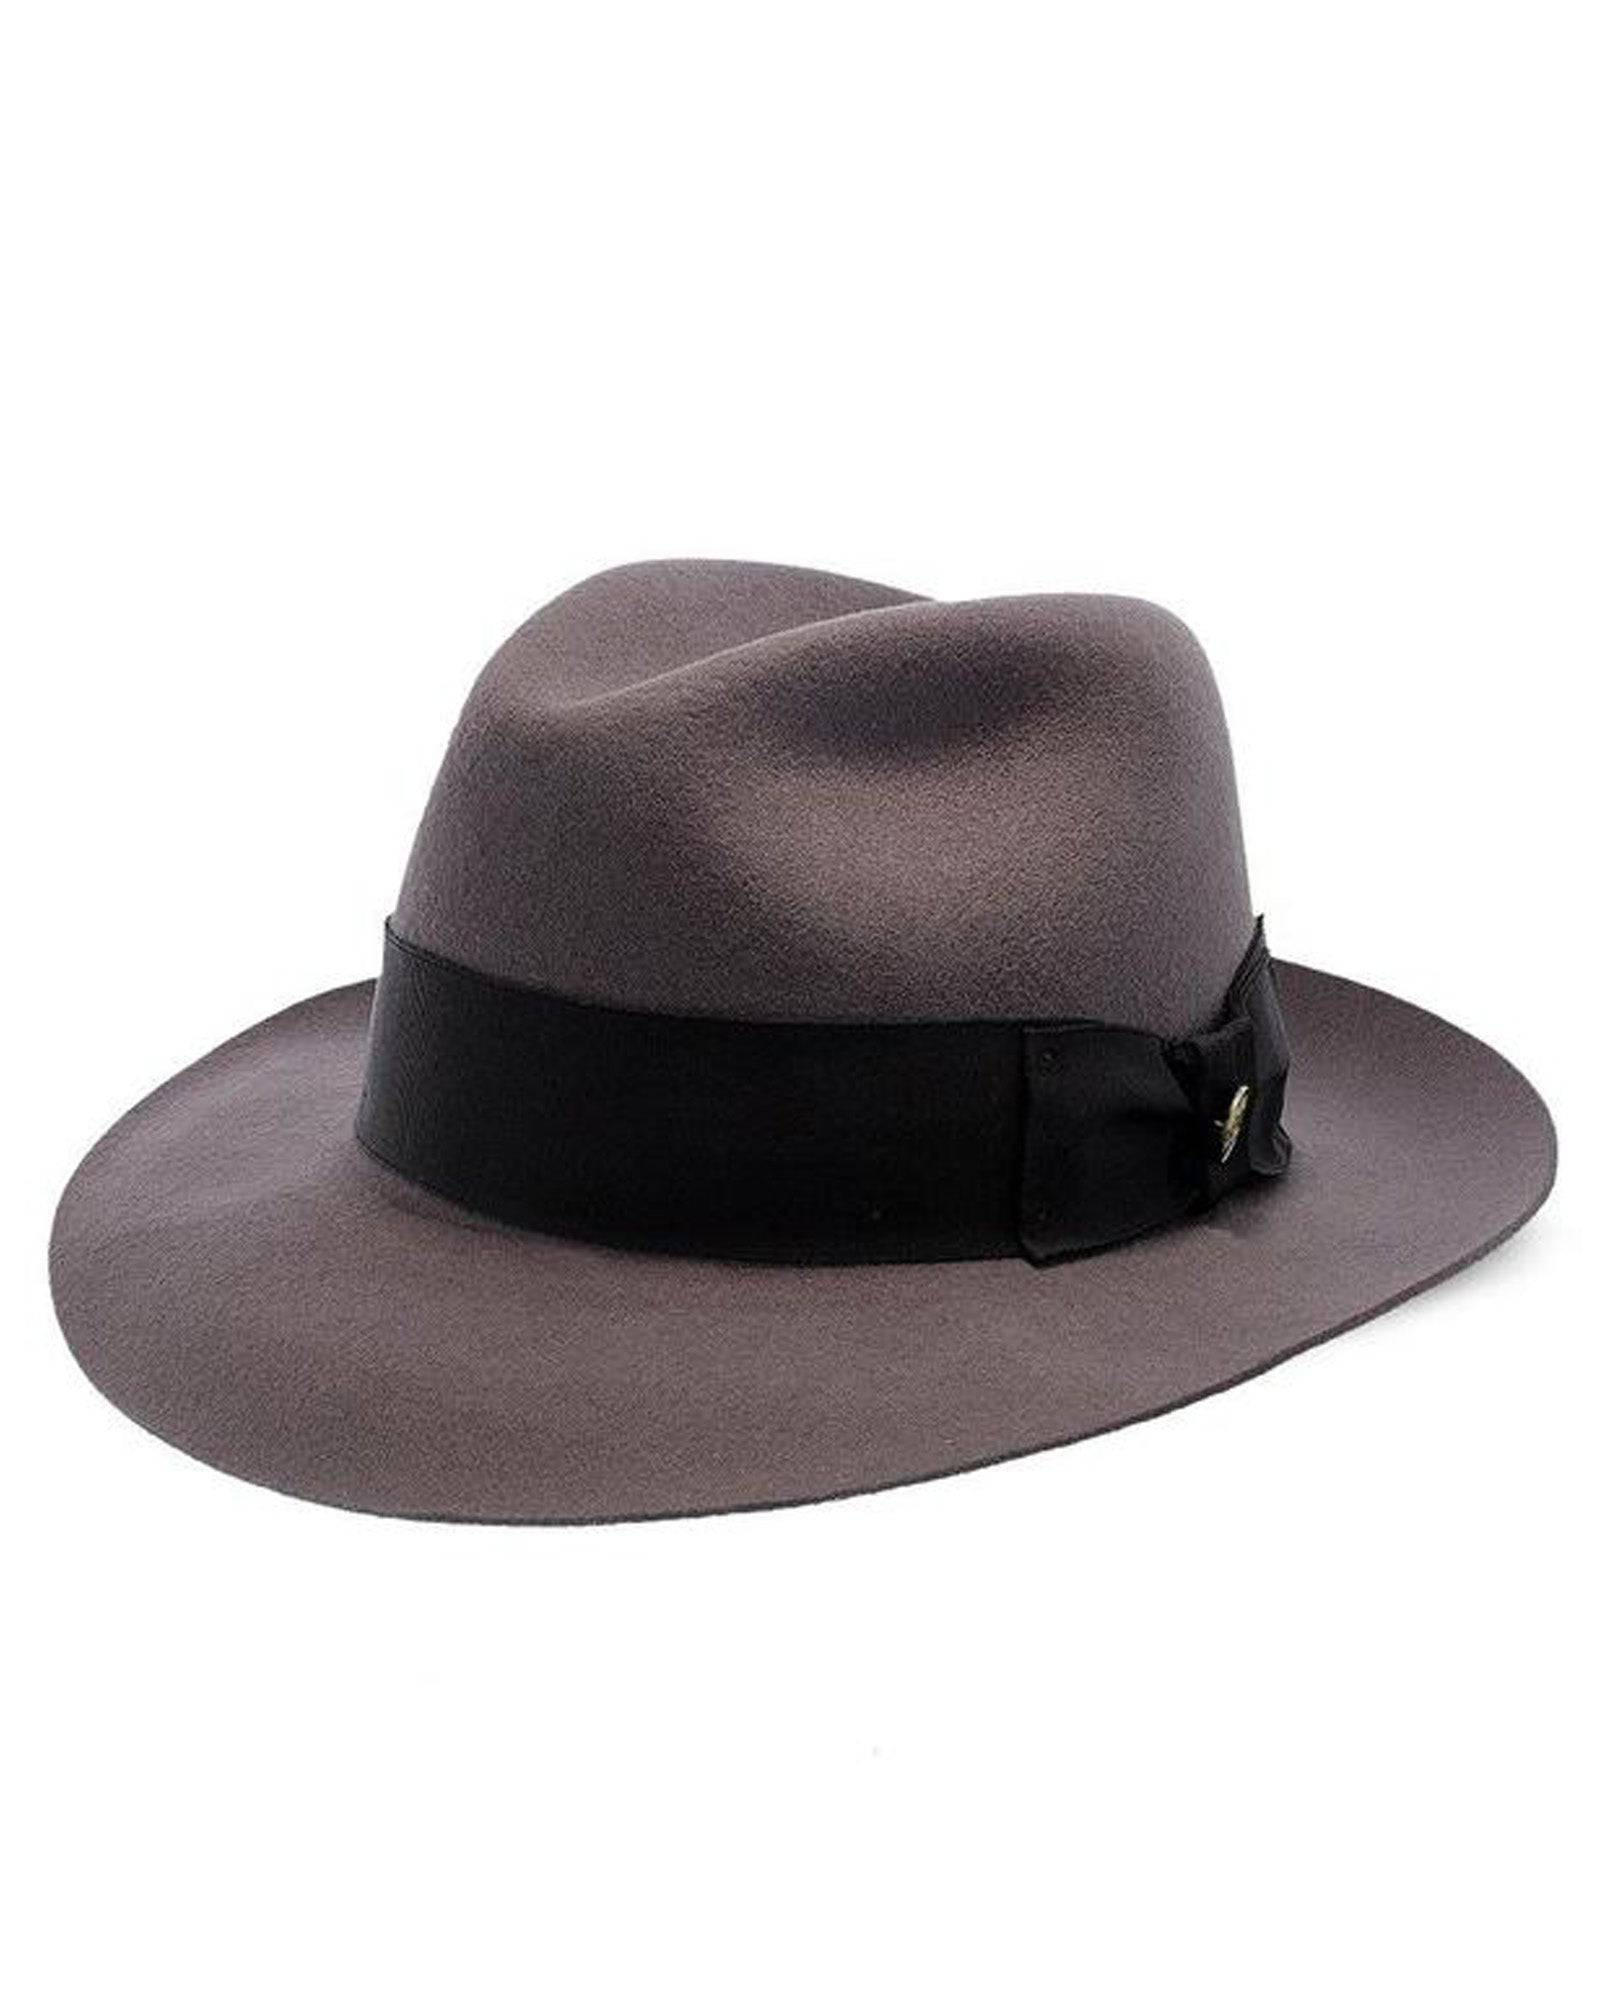 Stetson Temple Wool Felt Hat in Caribou - Rainwater's Men's Clothing and Tuxedo Rental